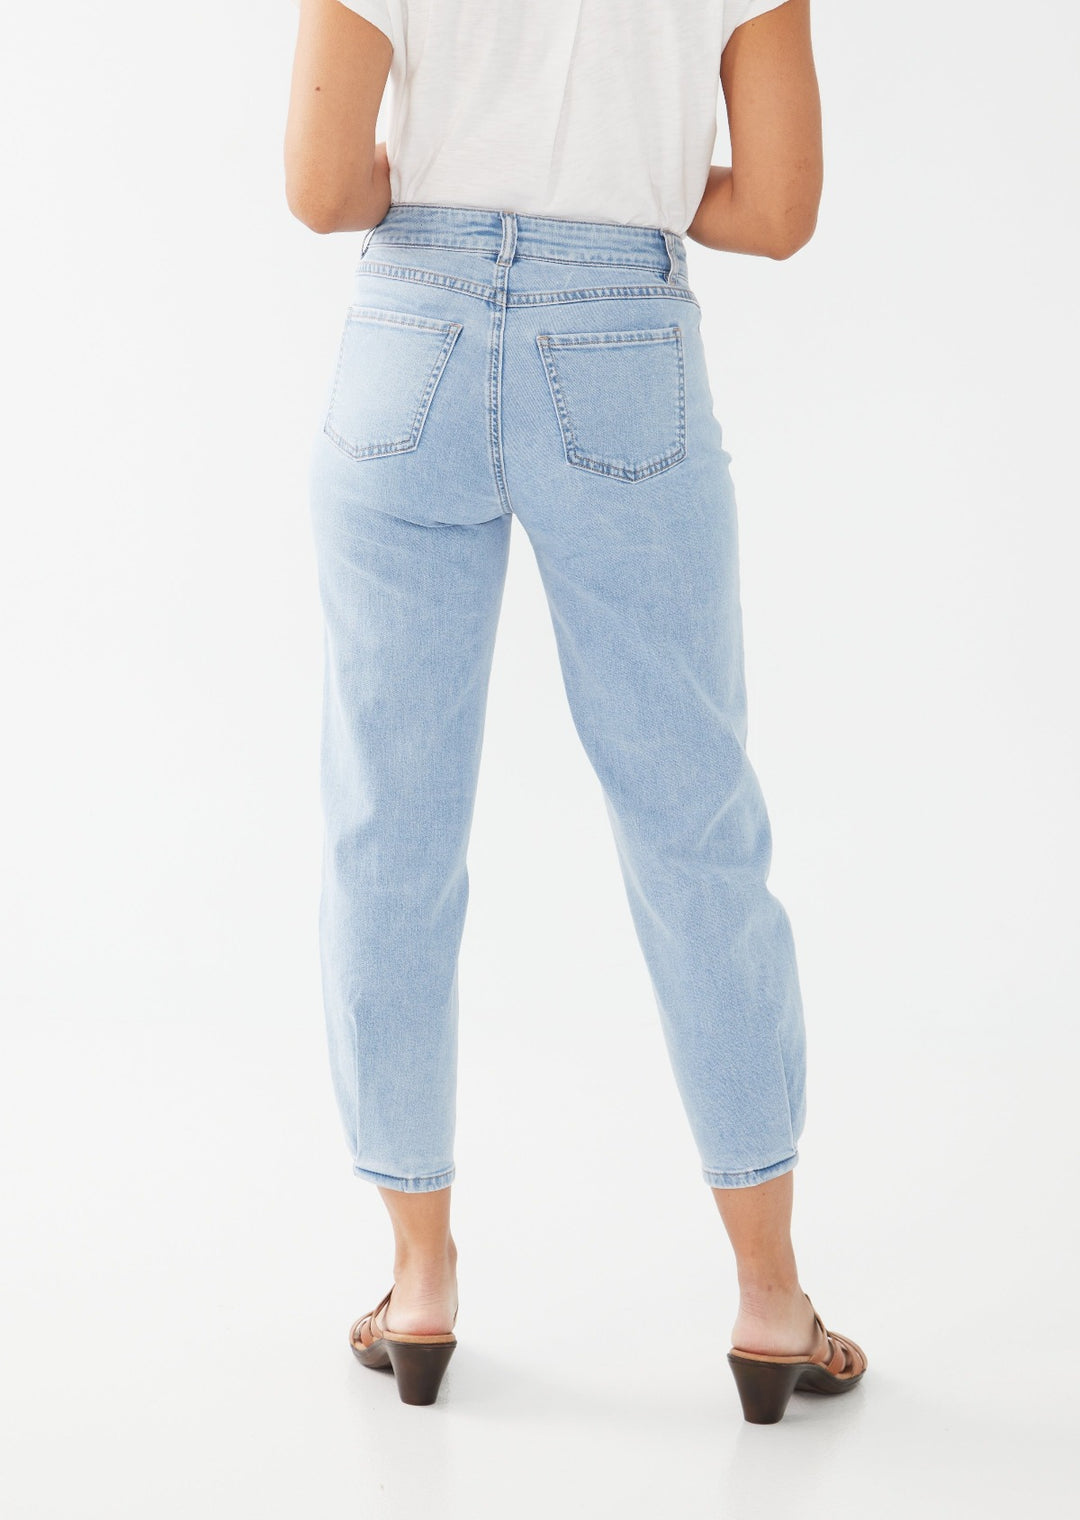 French Dressing Jeans - Tapered Girlfriend Jean